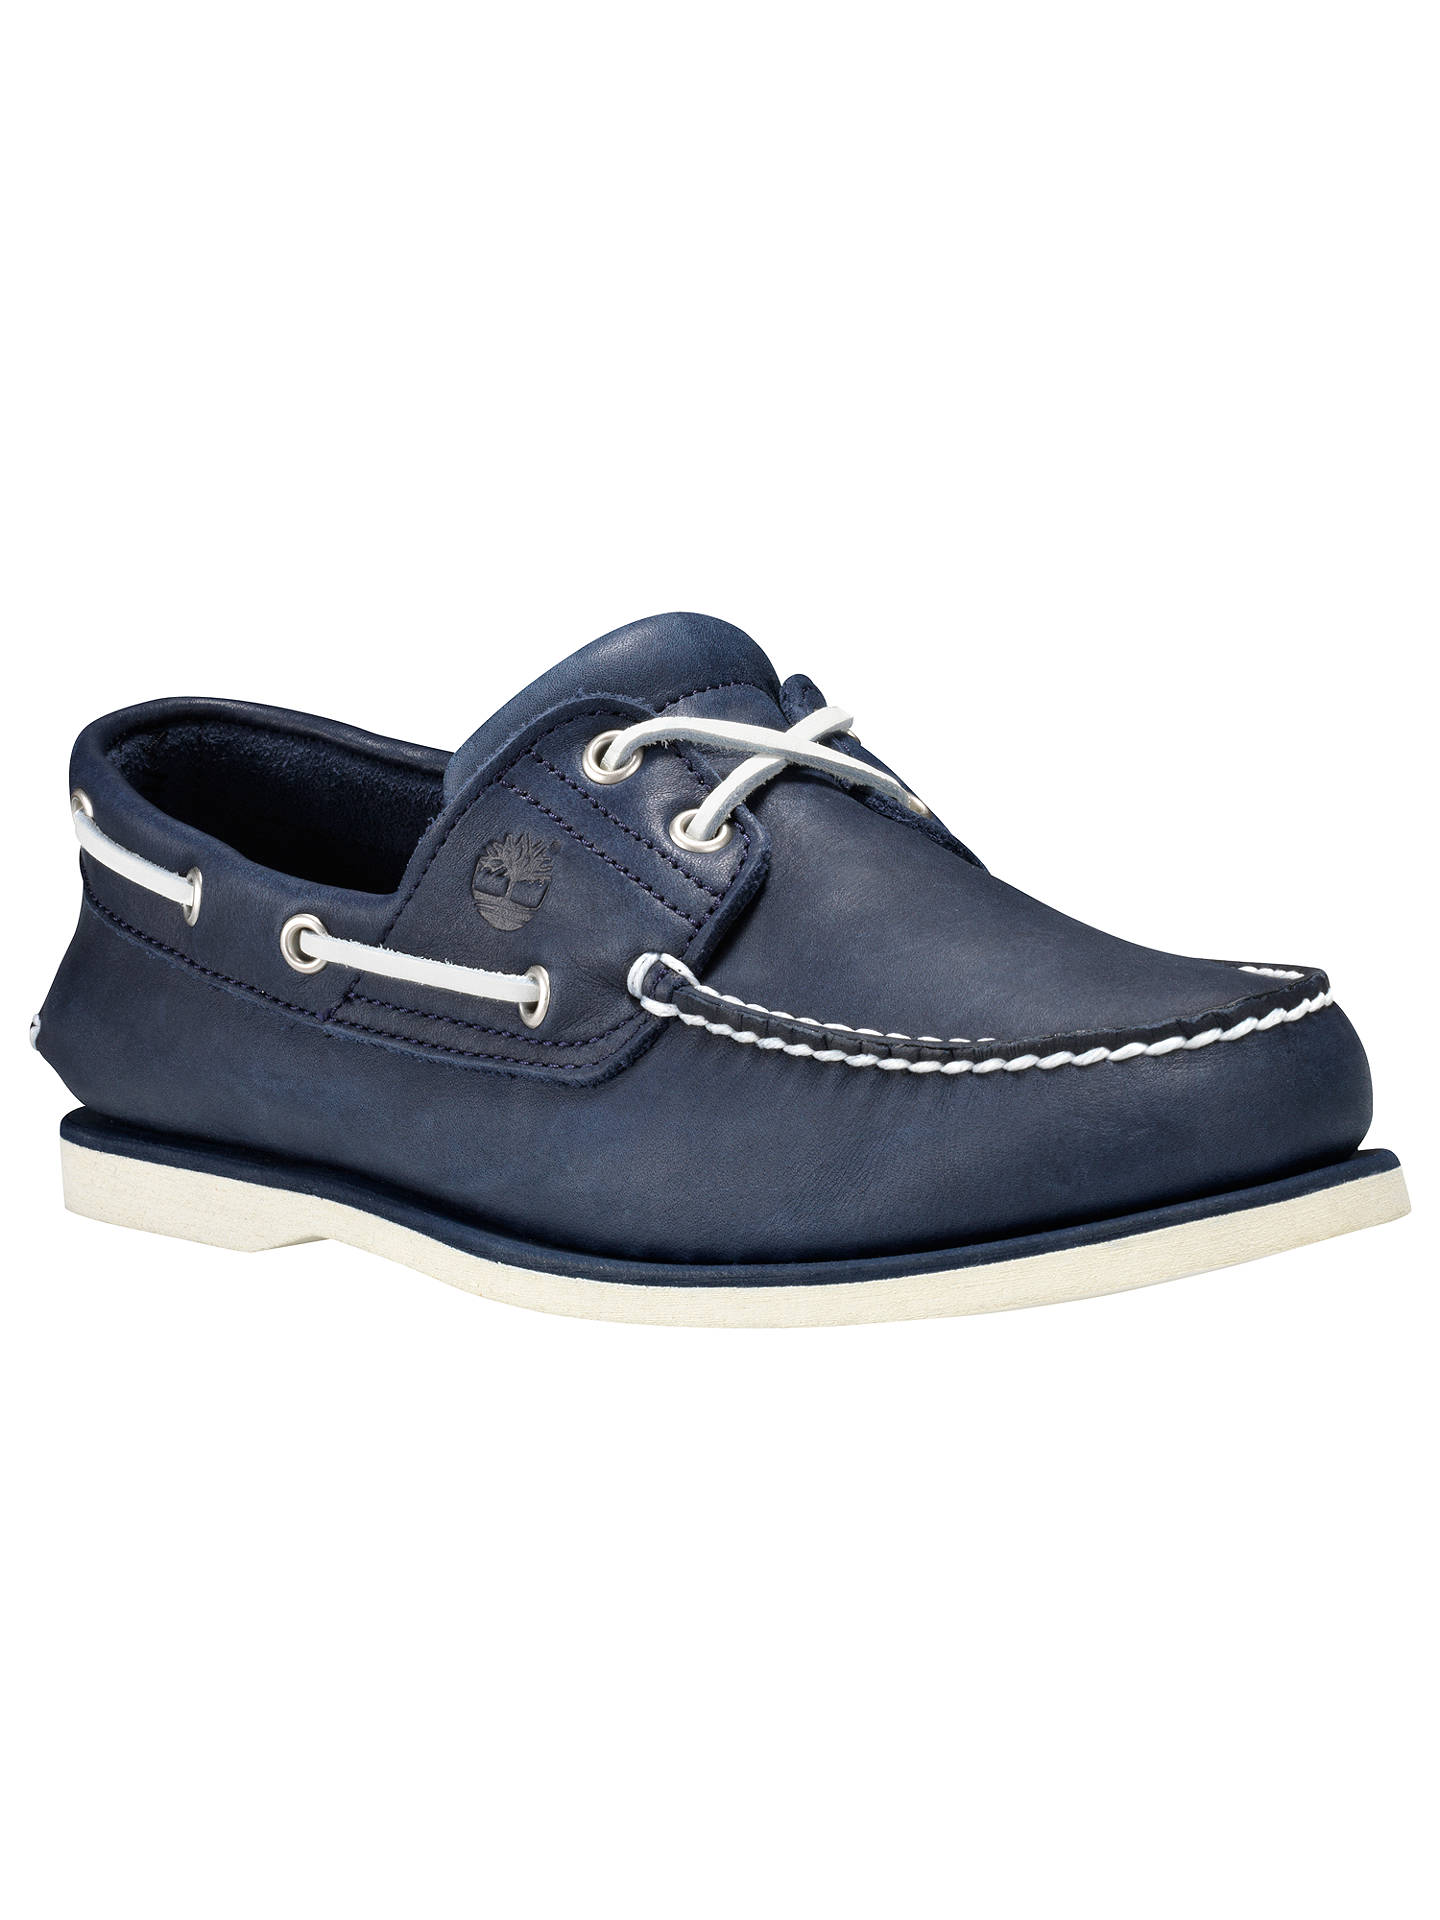 Timberland Nubuck Leather Boat Shoes, Blue at John Lewis & Partners